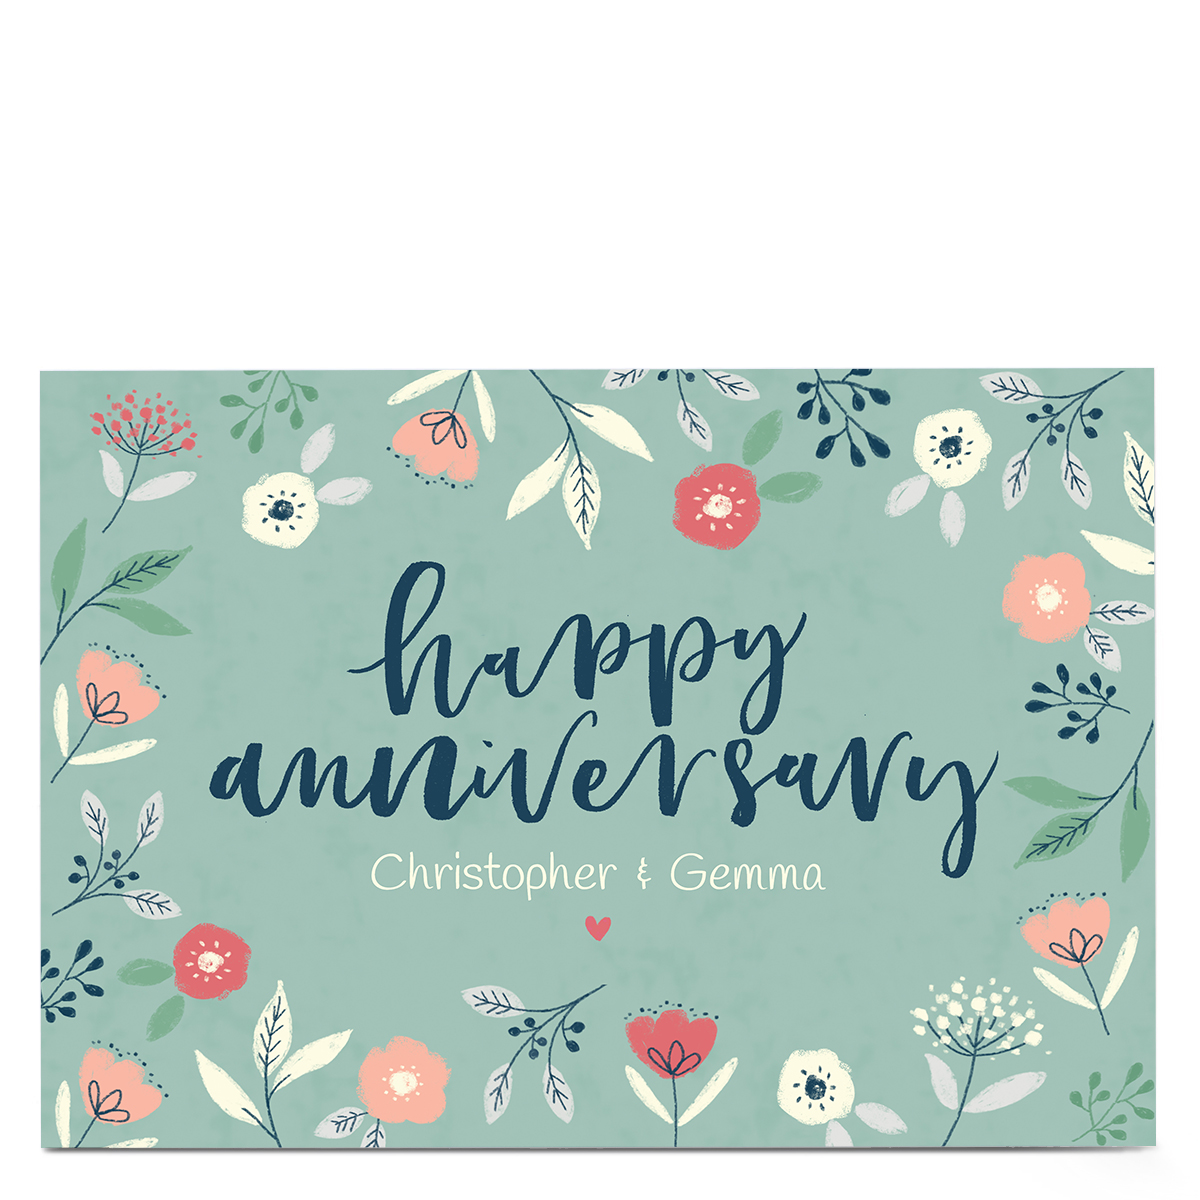 Personalised Nikki Whiston Anniversary Card - Floral